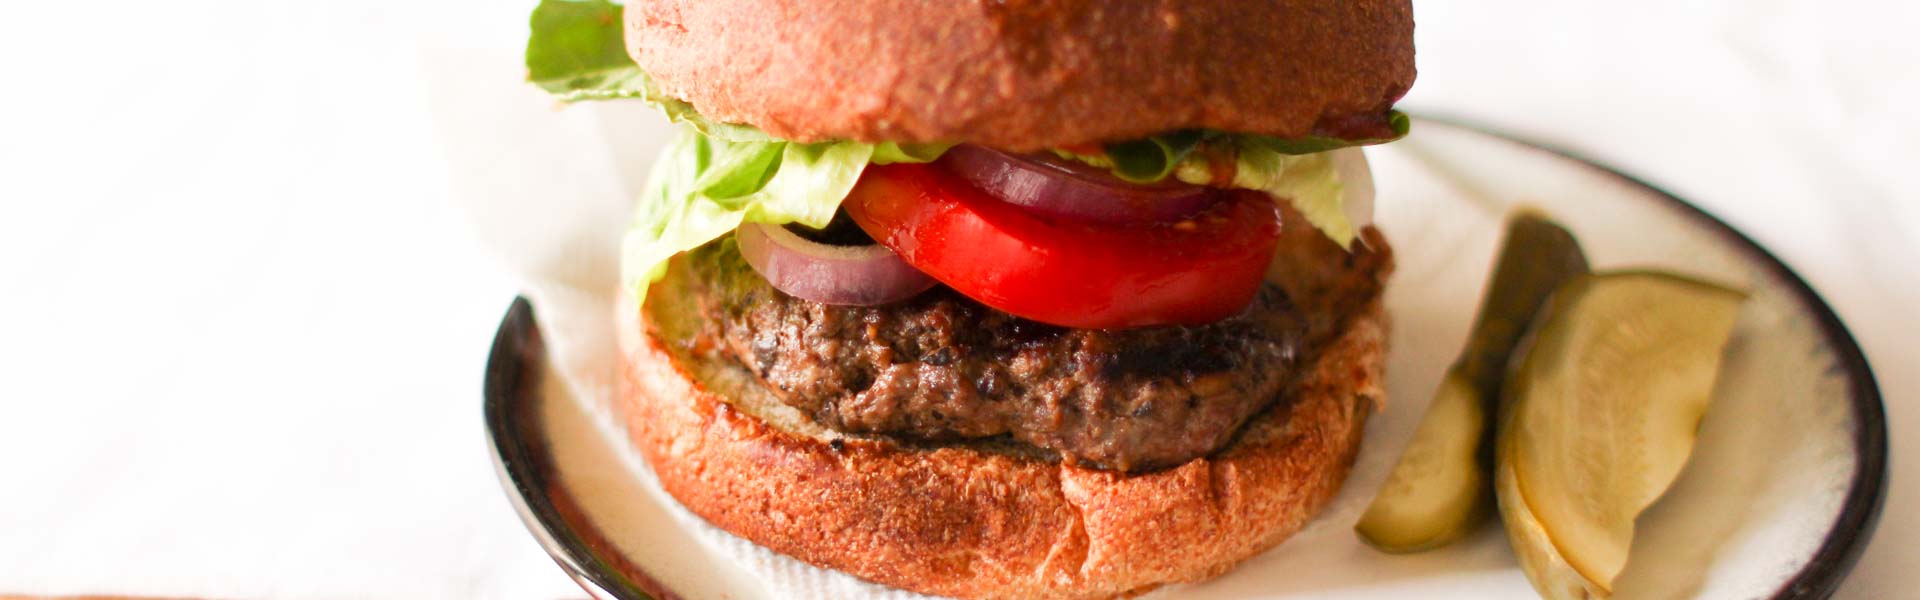 Blended Mushroom Beef Burger with Dried Plum Puree makes a burger that tastes juicy and rich without as much meat or sodium.